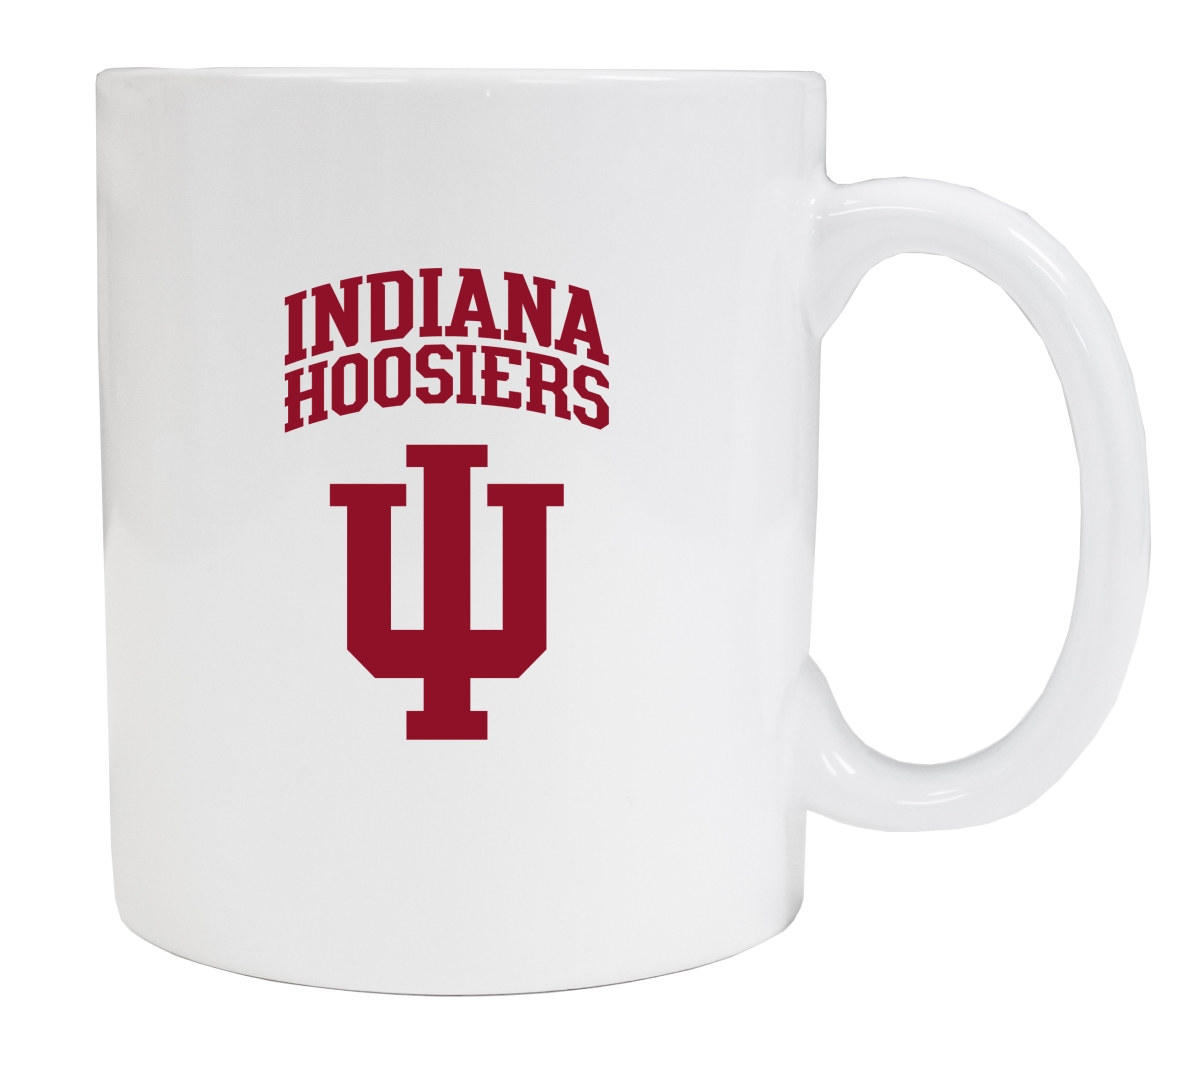 Picture of R & R Imports MUG2-C-IND19 W Indiana Hoosiers White Ceramic Coffee Mug - Pack of 2